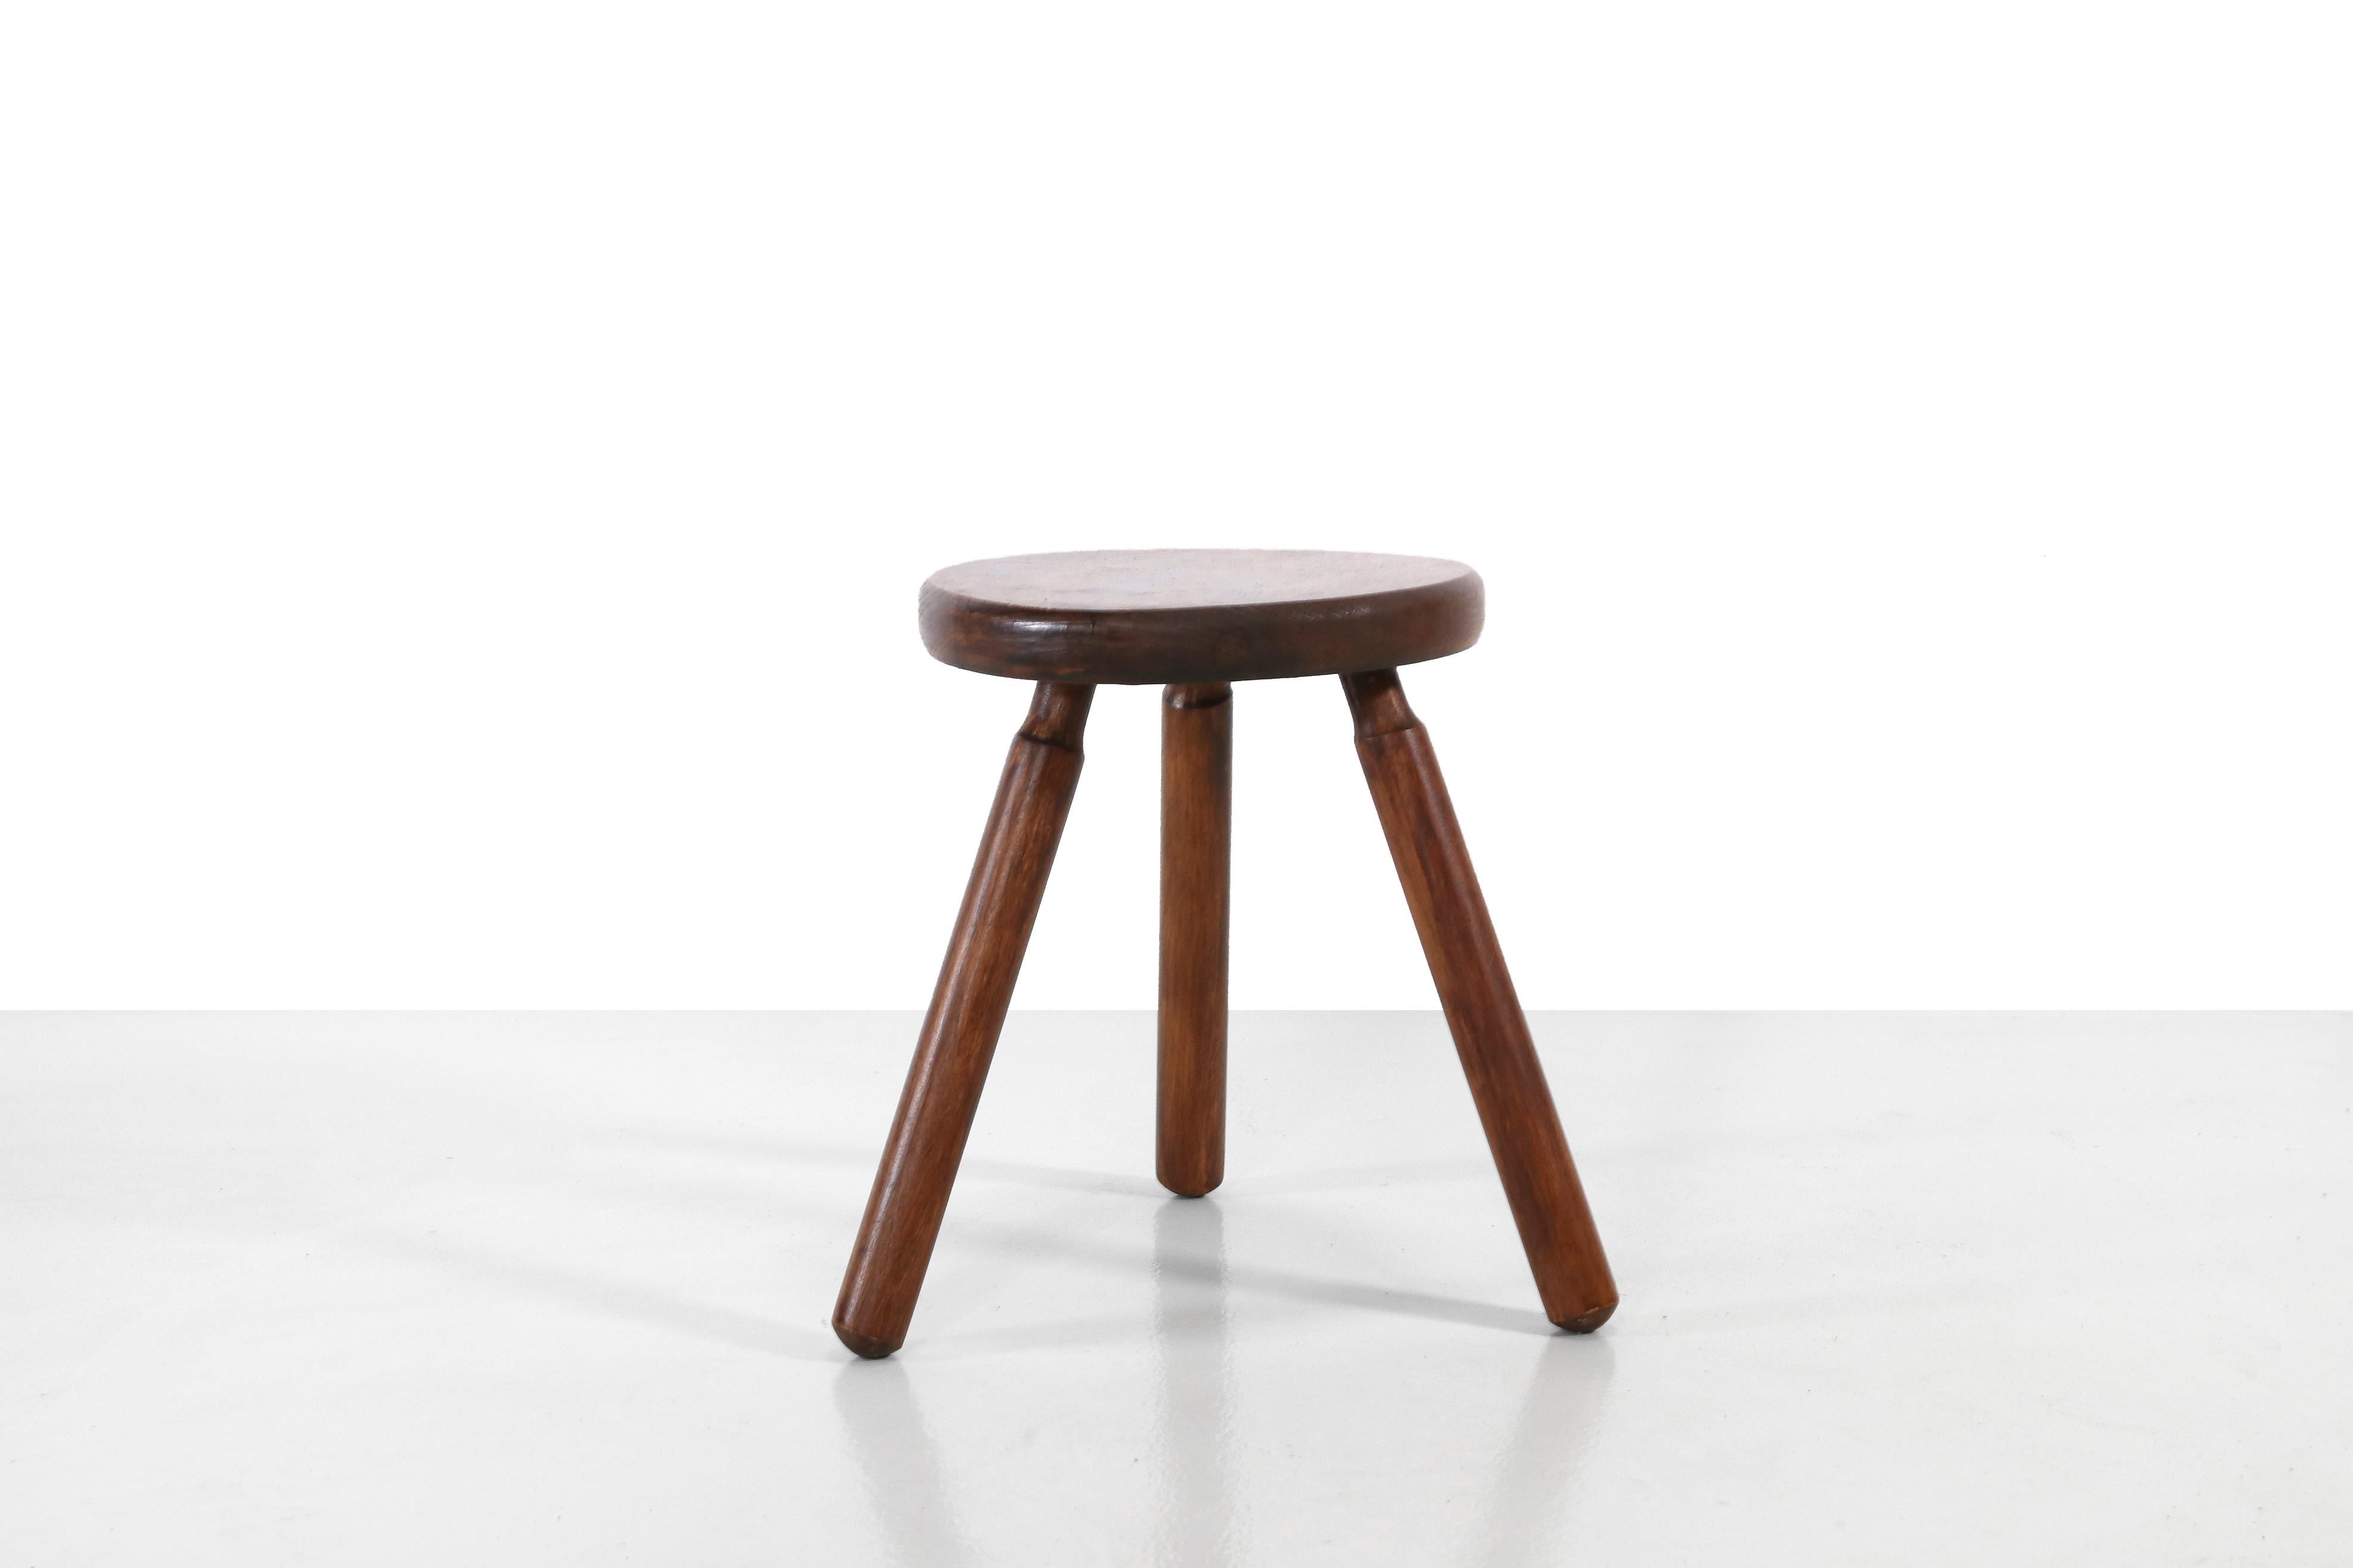 Nice mid-century wooden stool from the 1950s. Made of solid beech wood which is stained and is perfect to use as a side table or for example as plant table. The stool is 28 cm high and has a diameter of 21 cm.